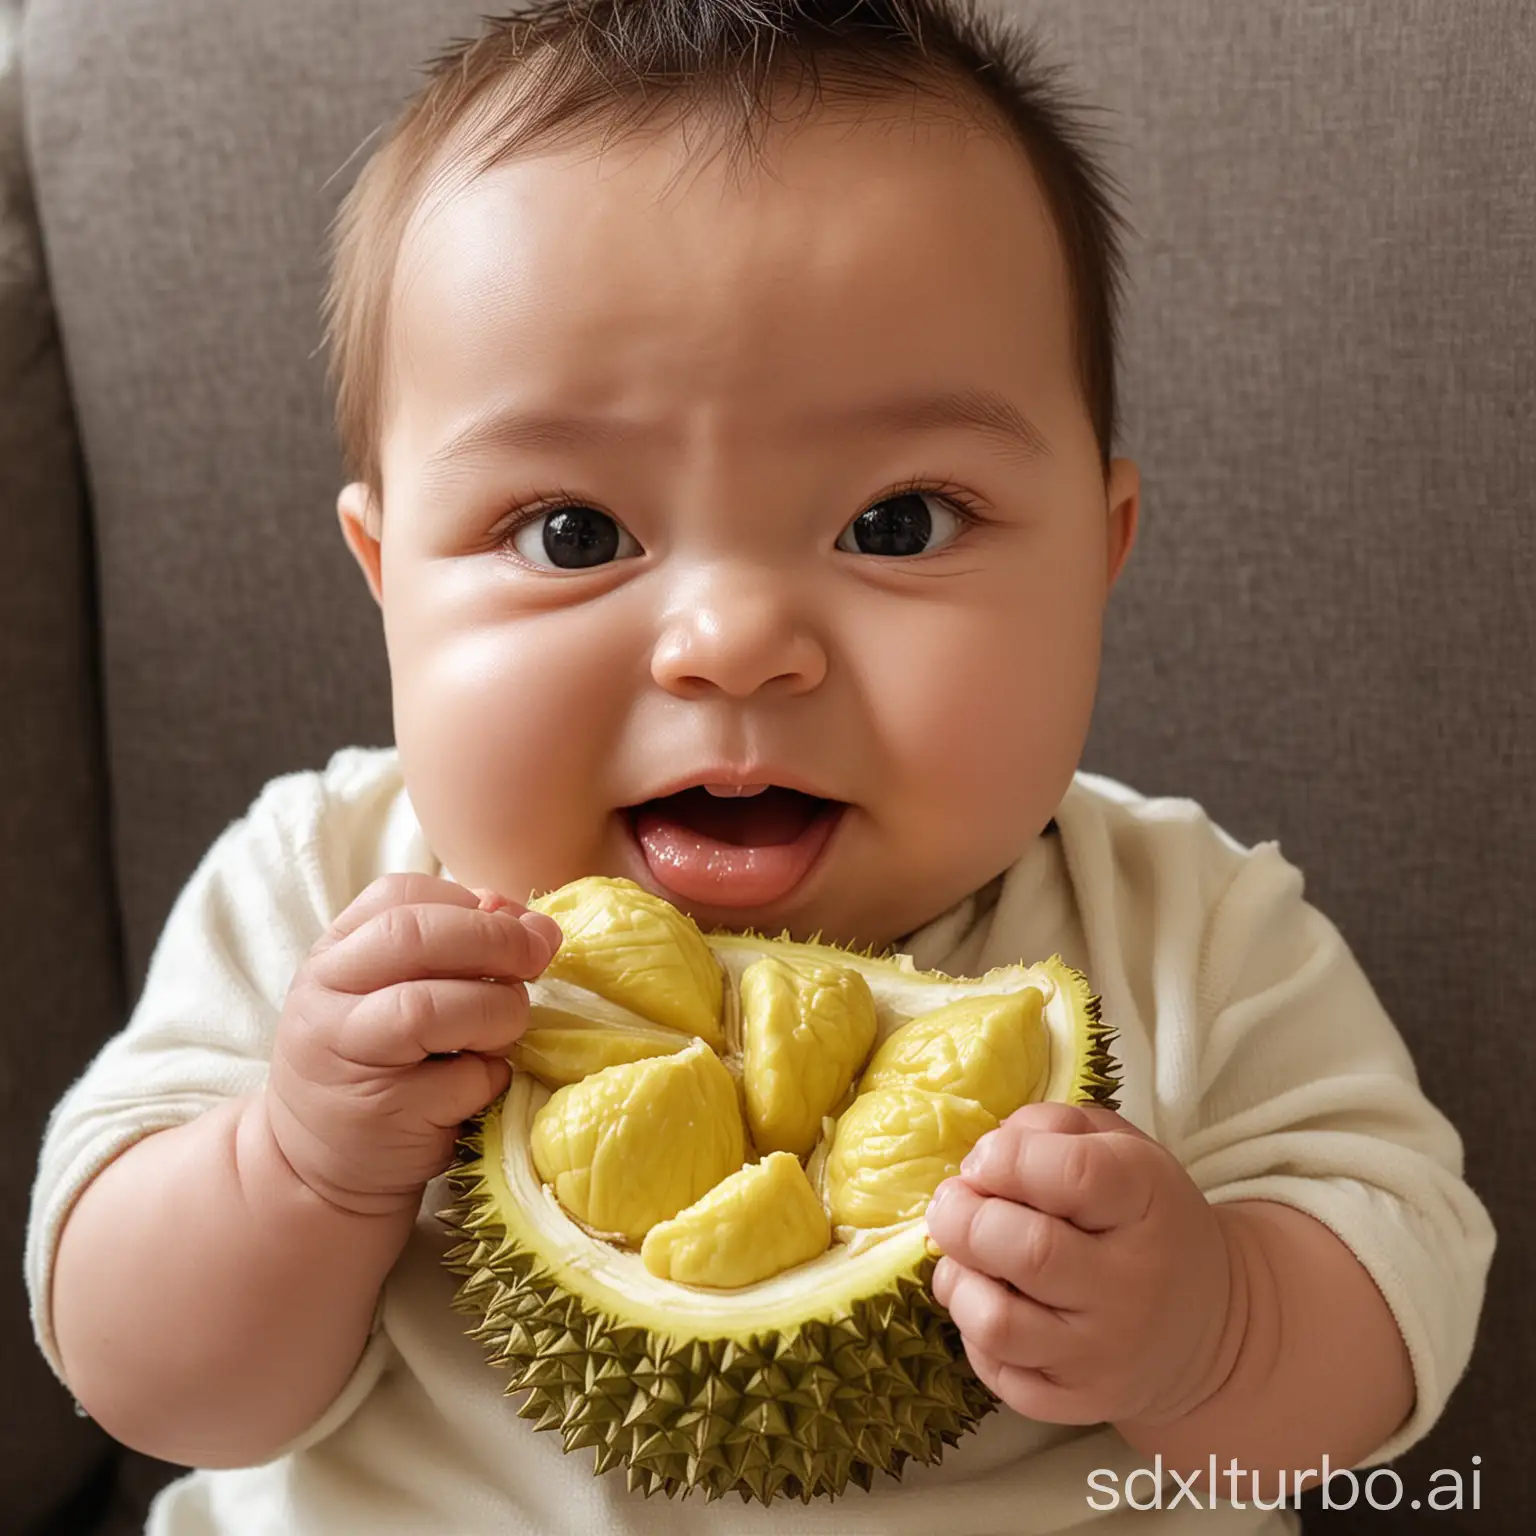 Adorable-Chubby-Baby-Eating-Durian-Fruit